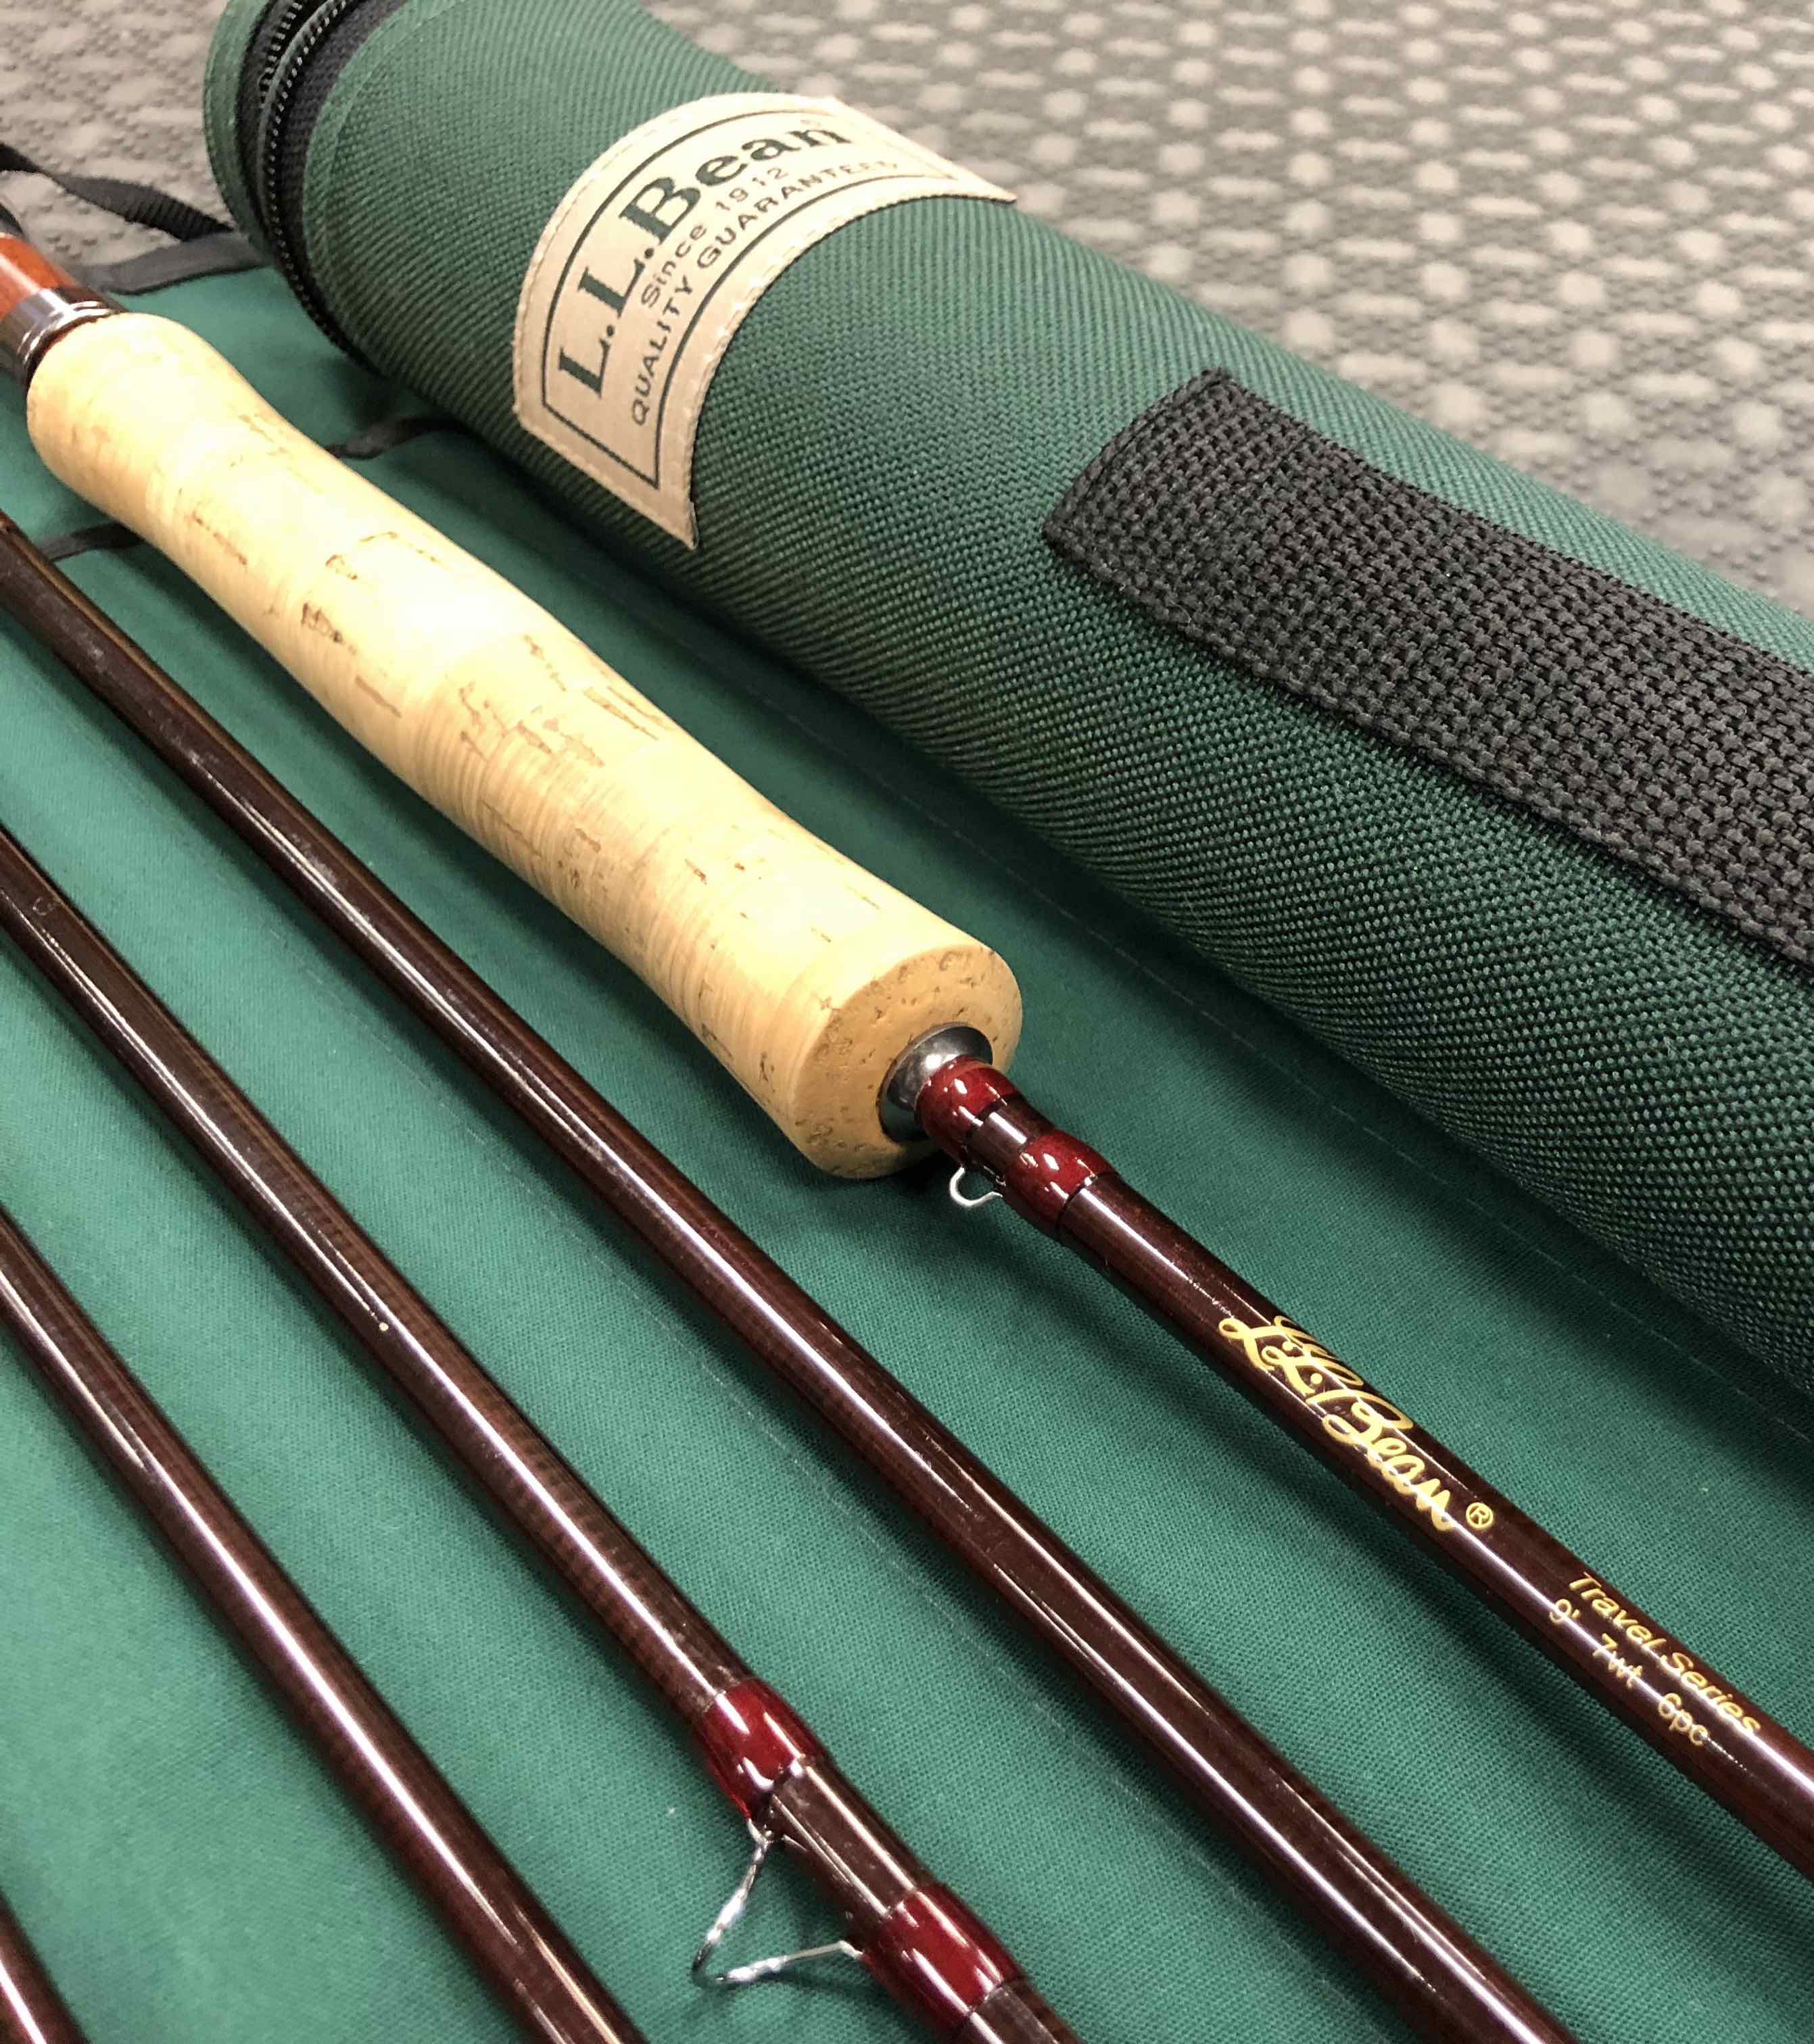 SOLD! – NEWER PRICE! – LL Bean Travel Series 9′ 7wt 6pc Fly Rod c